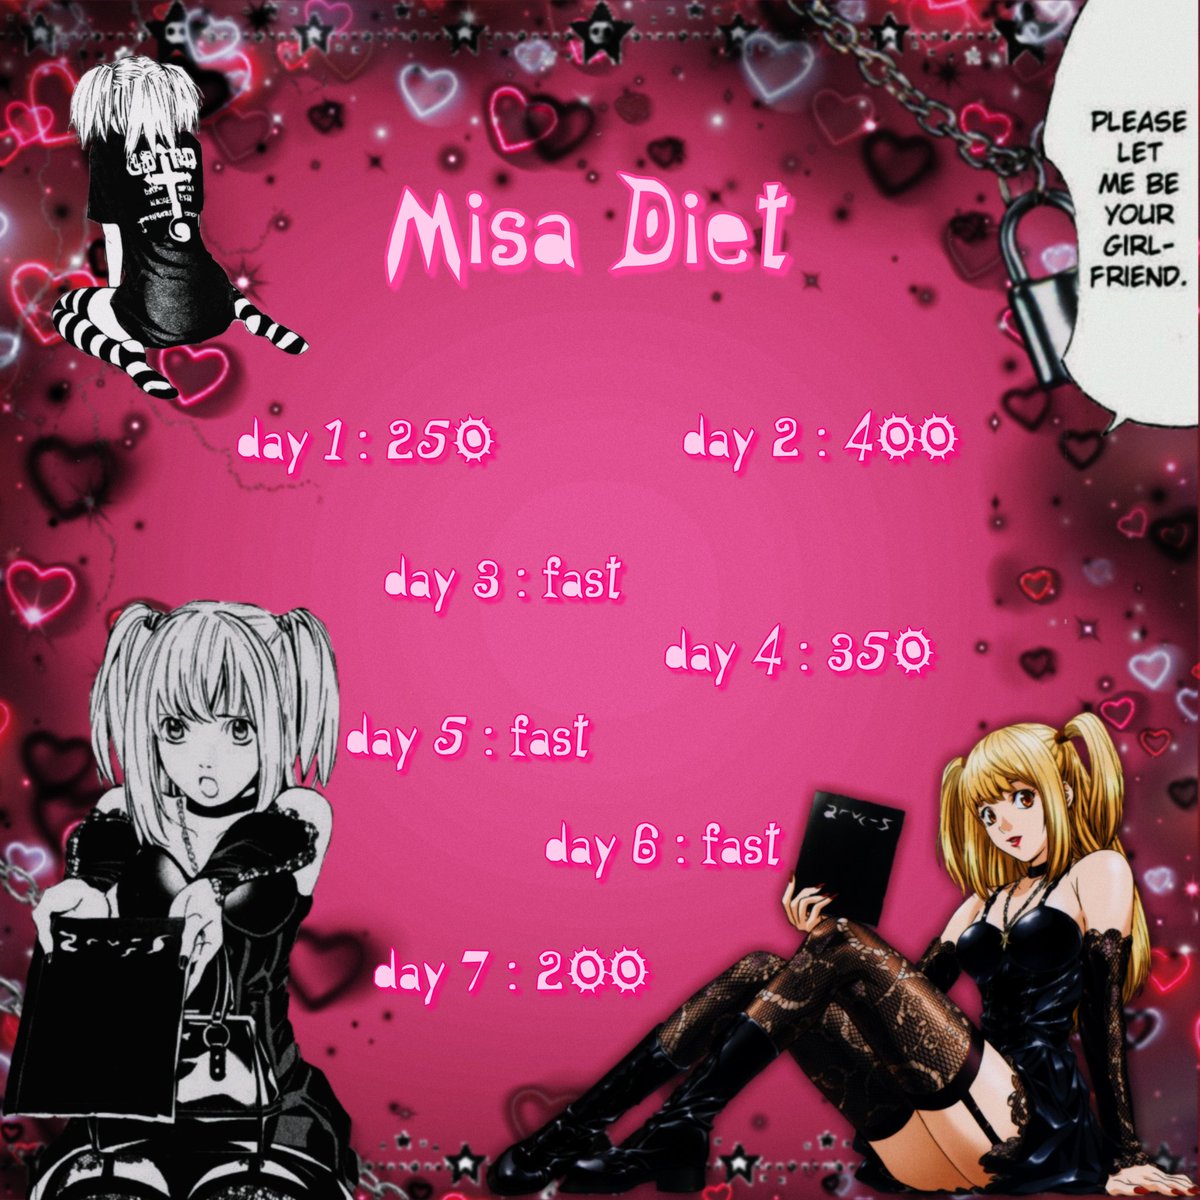 misa's diet :: misa obviously eats super balanced and healthy too but definitely goes on extreme diets from time to time so that's exactly what i based her diet on !